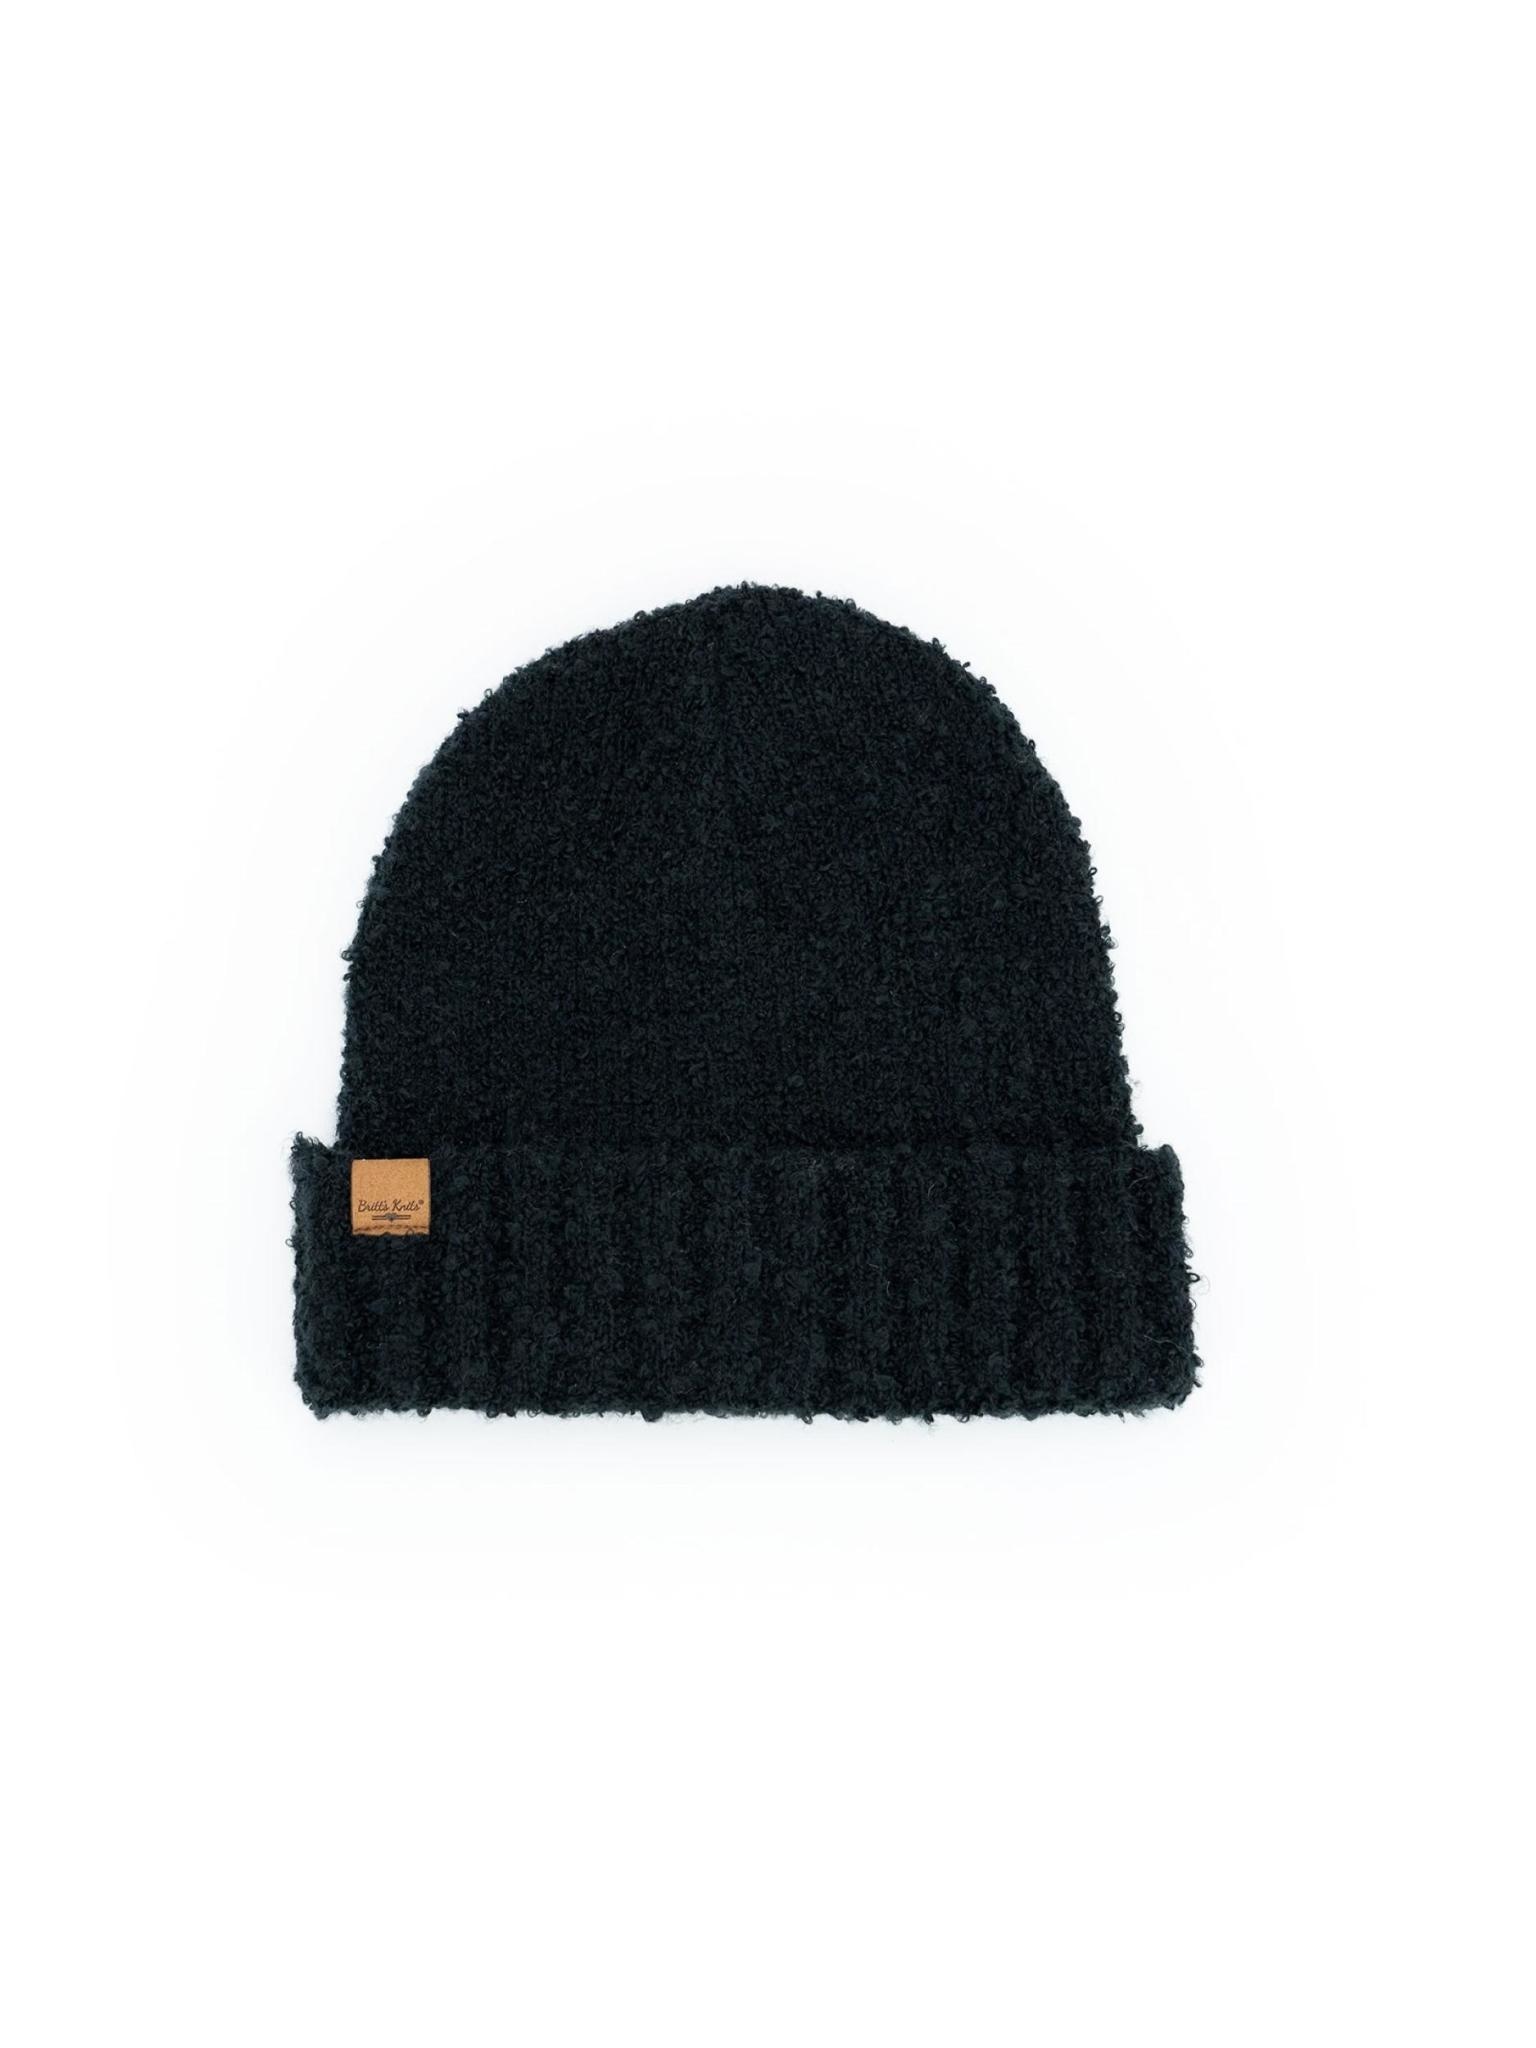 Common Good Recycled Beanie